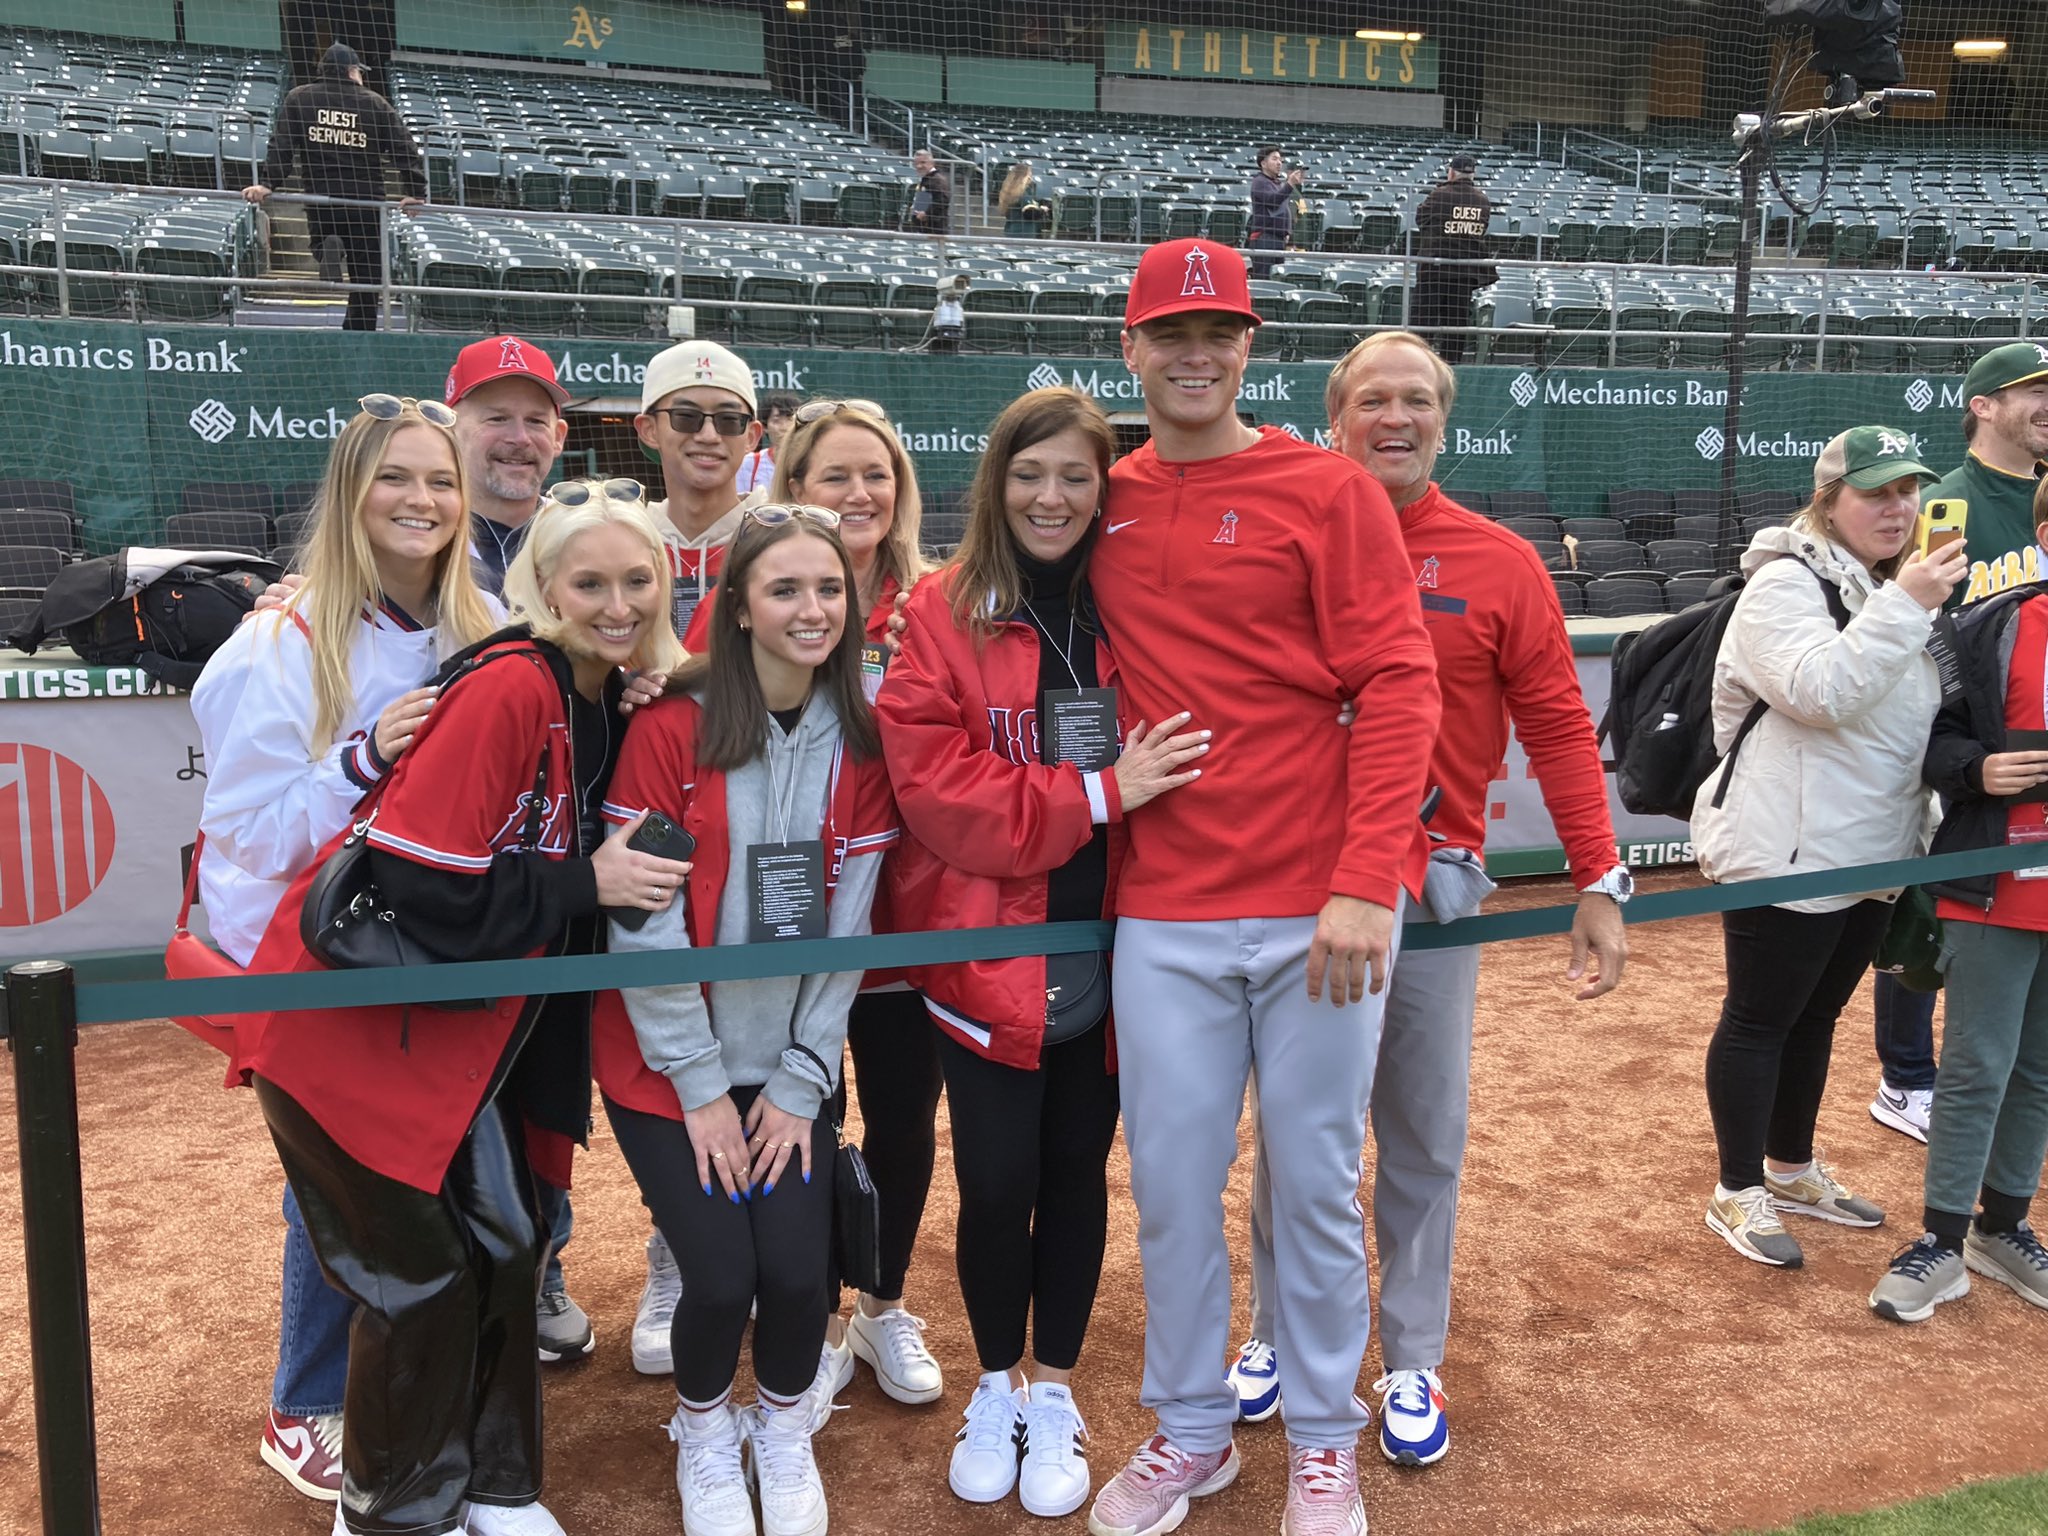 Janie McCauley on X: “It's bigger than the dream, he's catching Shohei  Ohtani on opening day. It's crazy,” says proud mother Angela O'Hoppe of  seeing 23-year-old son Logan become the Angels' youngest